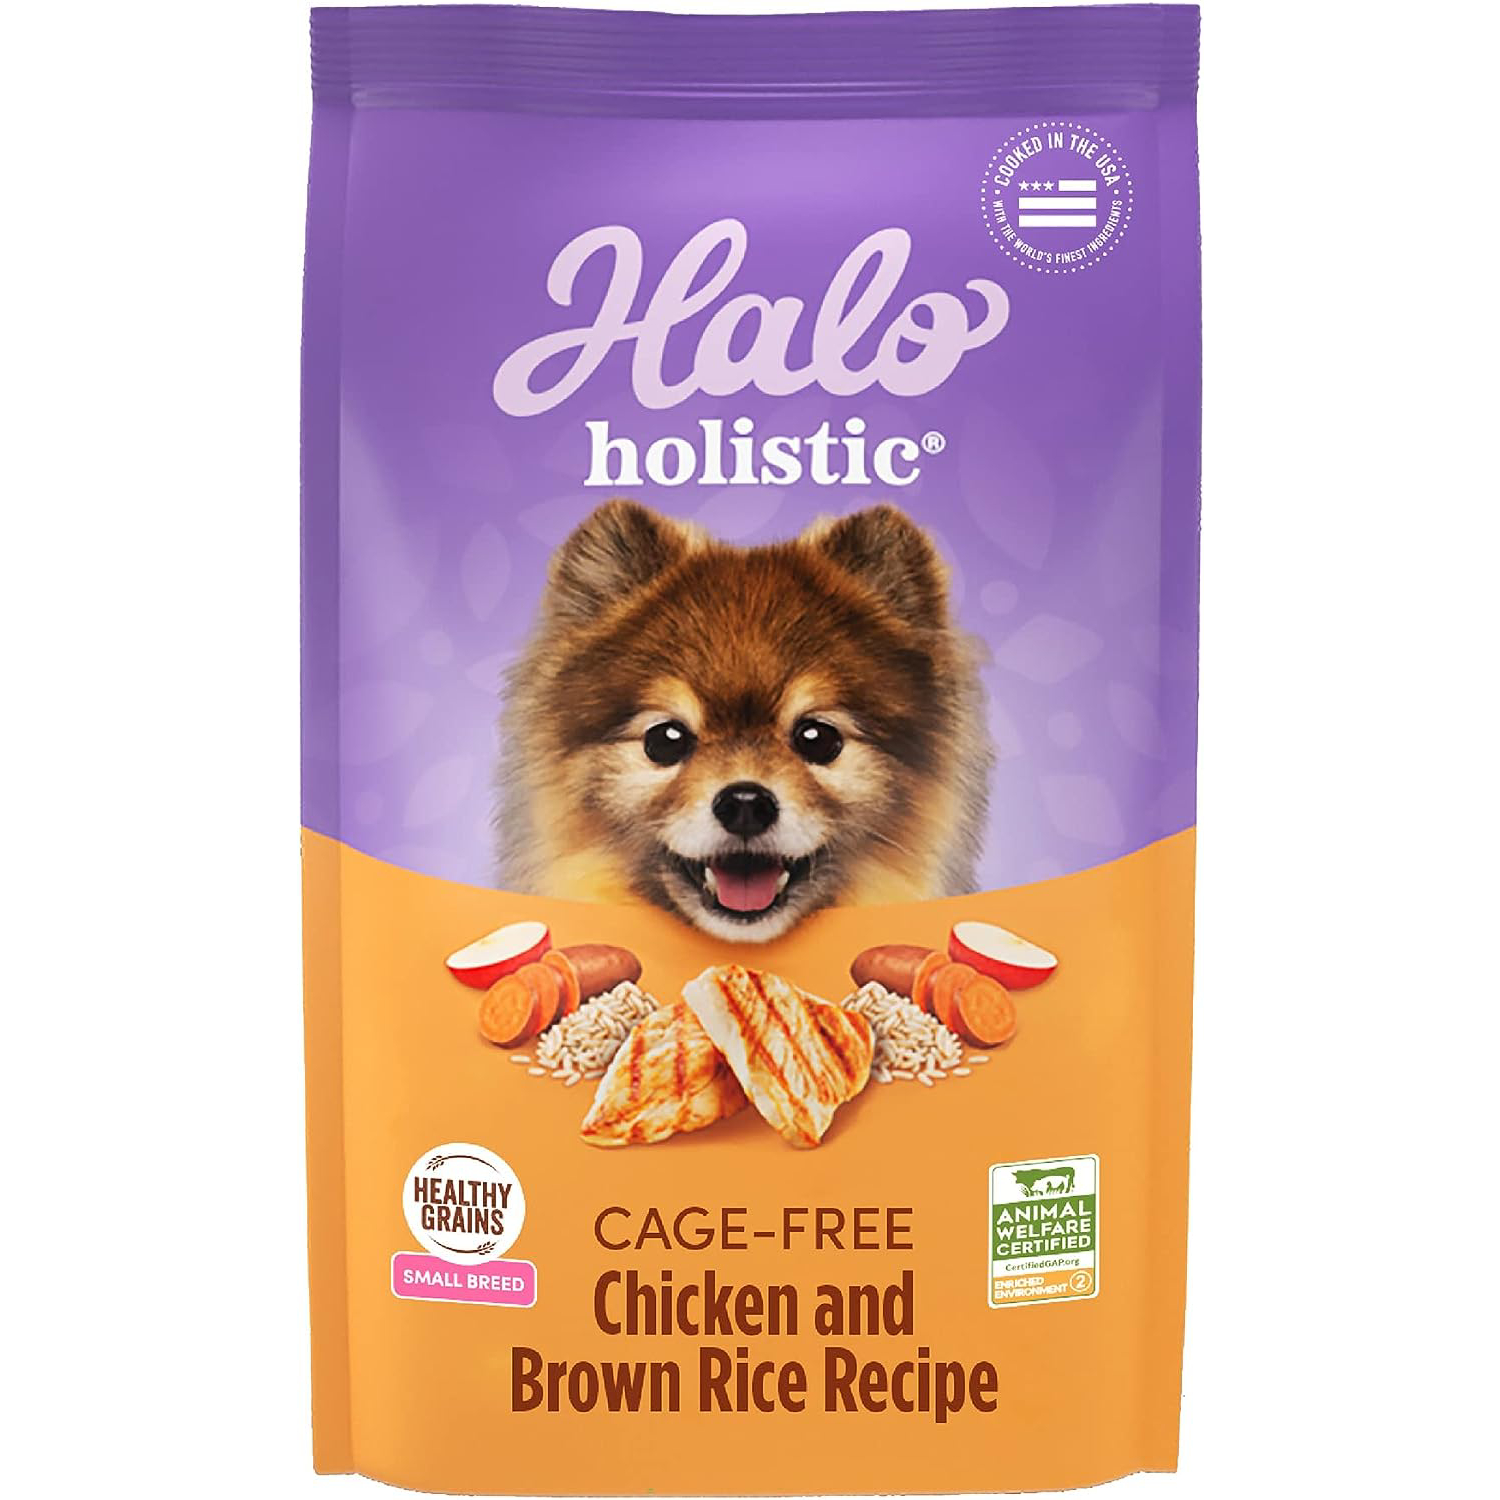 Halo Holistic Dog Food, Complete Digestive Health Cage-Free Chicken and Brown Rice Recipe